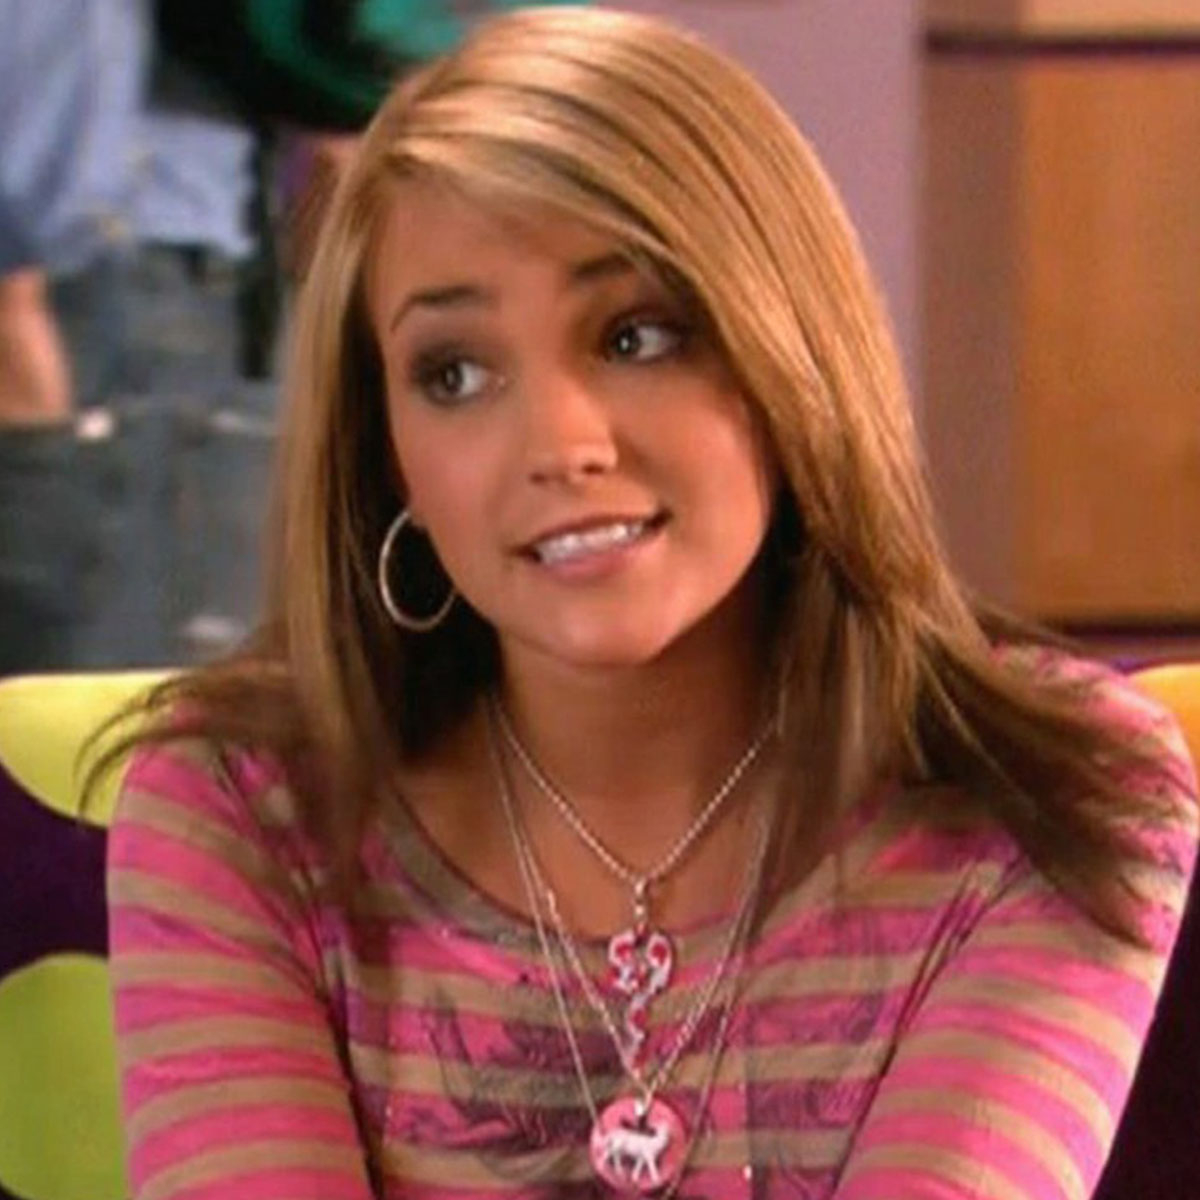 Victoria Justice Icarly Porn - Zoey 102: Jamie Lynn Spears Back for More Zoey 101 - E! Online